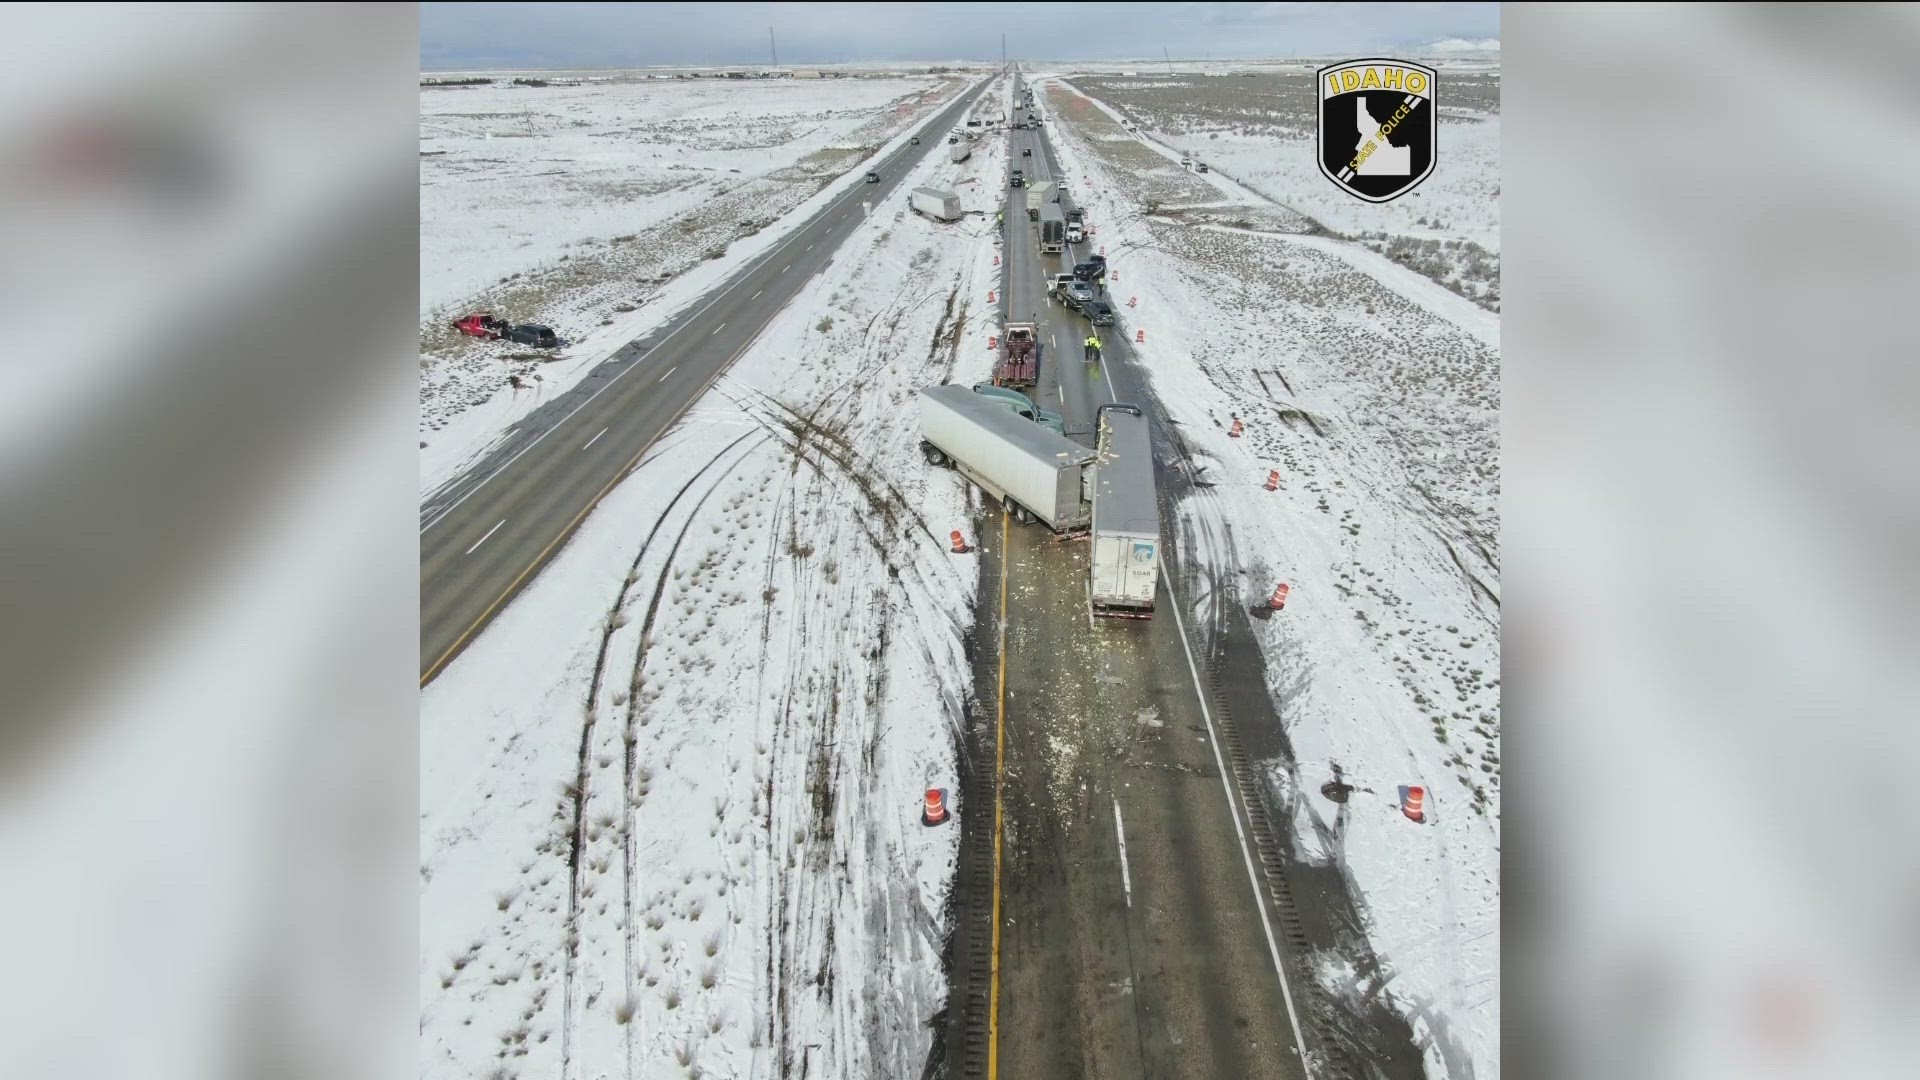 Idaho State Police said the crashes happened between a few miles from each other.